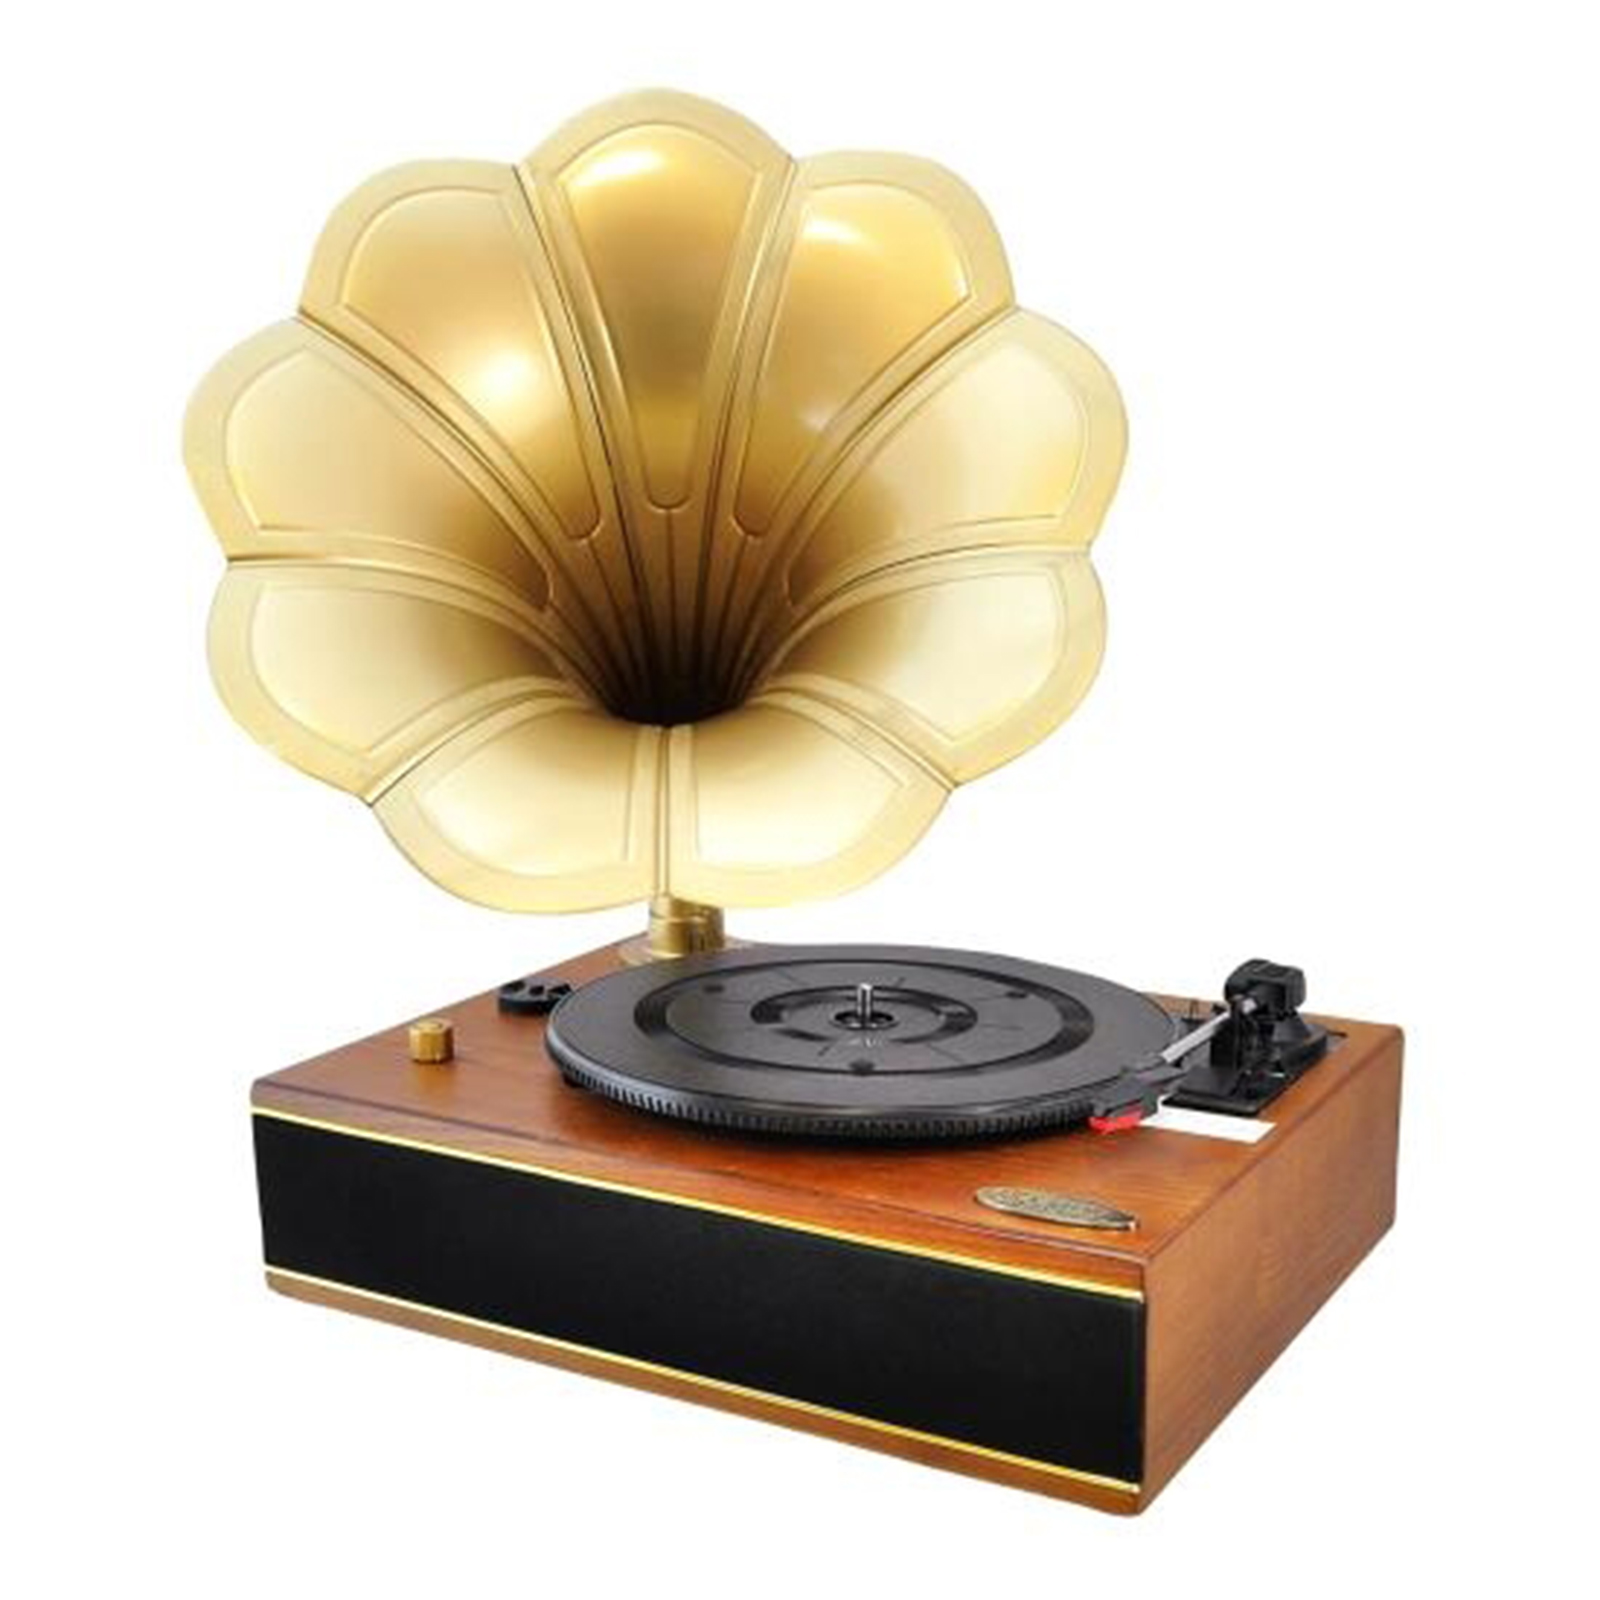 Vintage Classic Style BT Turntable Gramophone Phonograph Vinyl Record Player with Vinyl-to-MP3 Recording - image 1 of 1